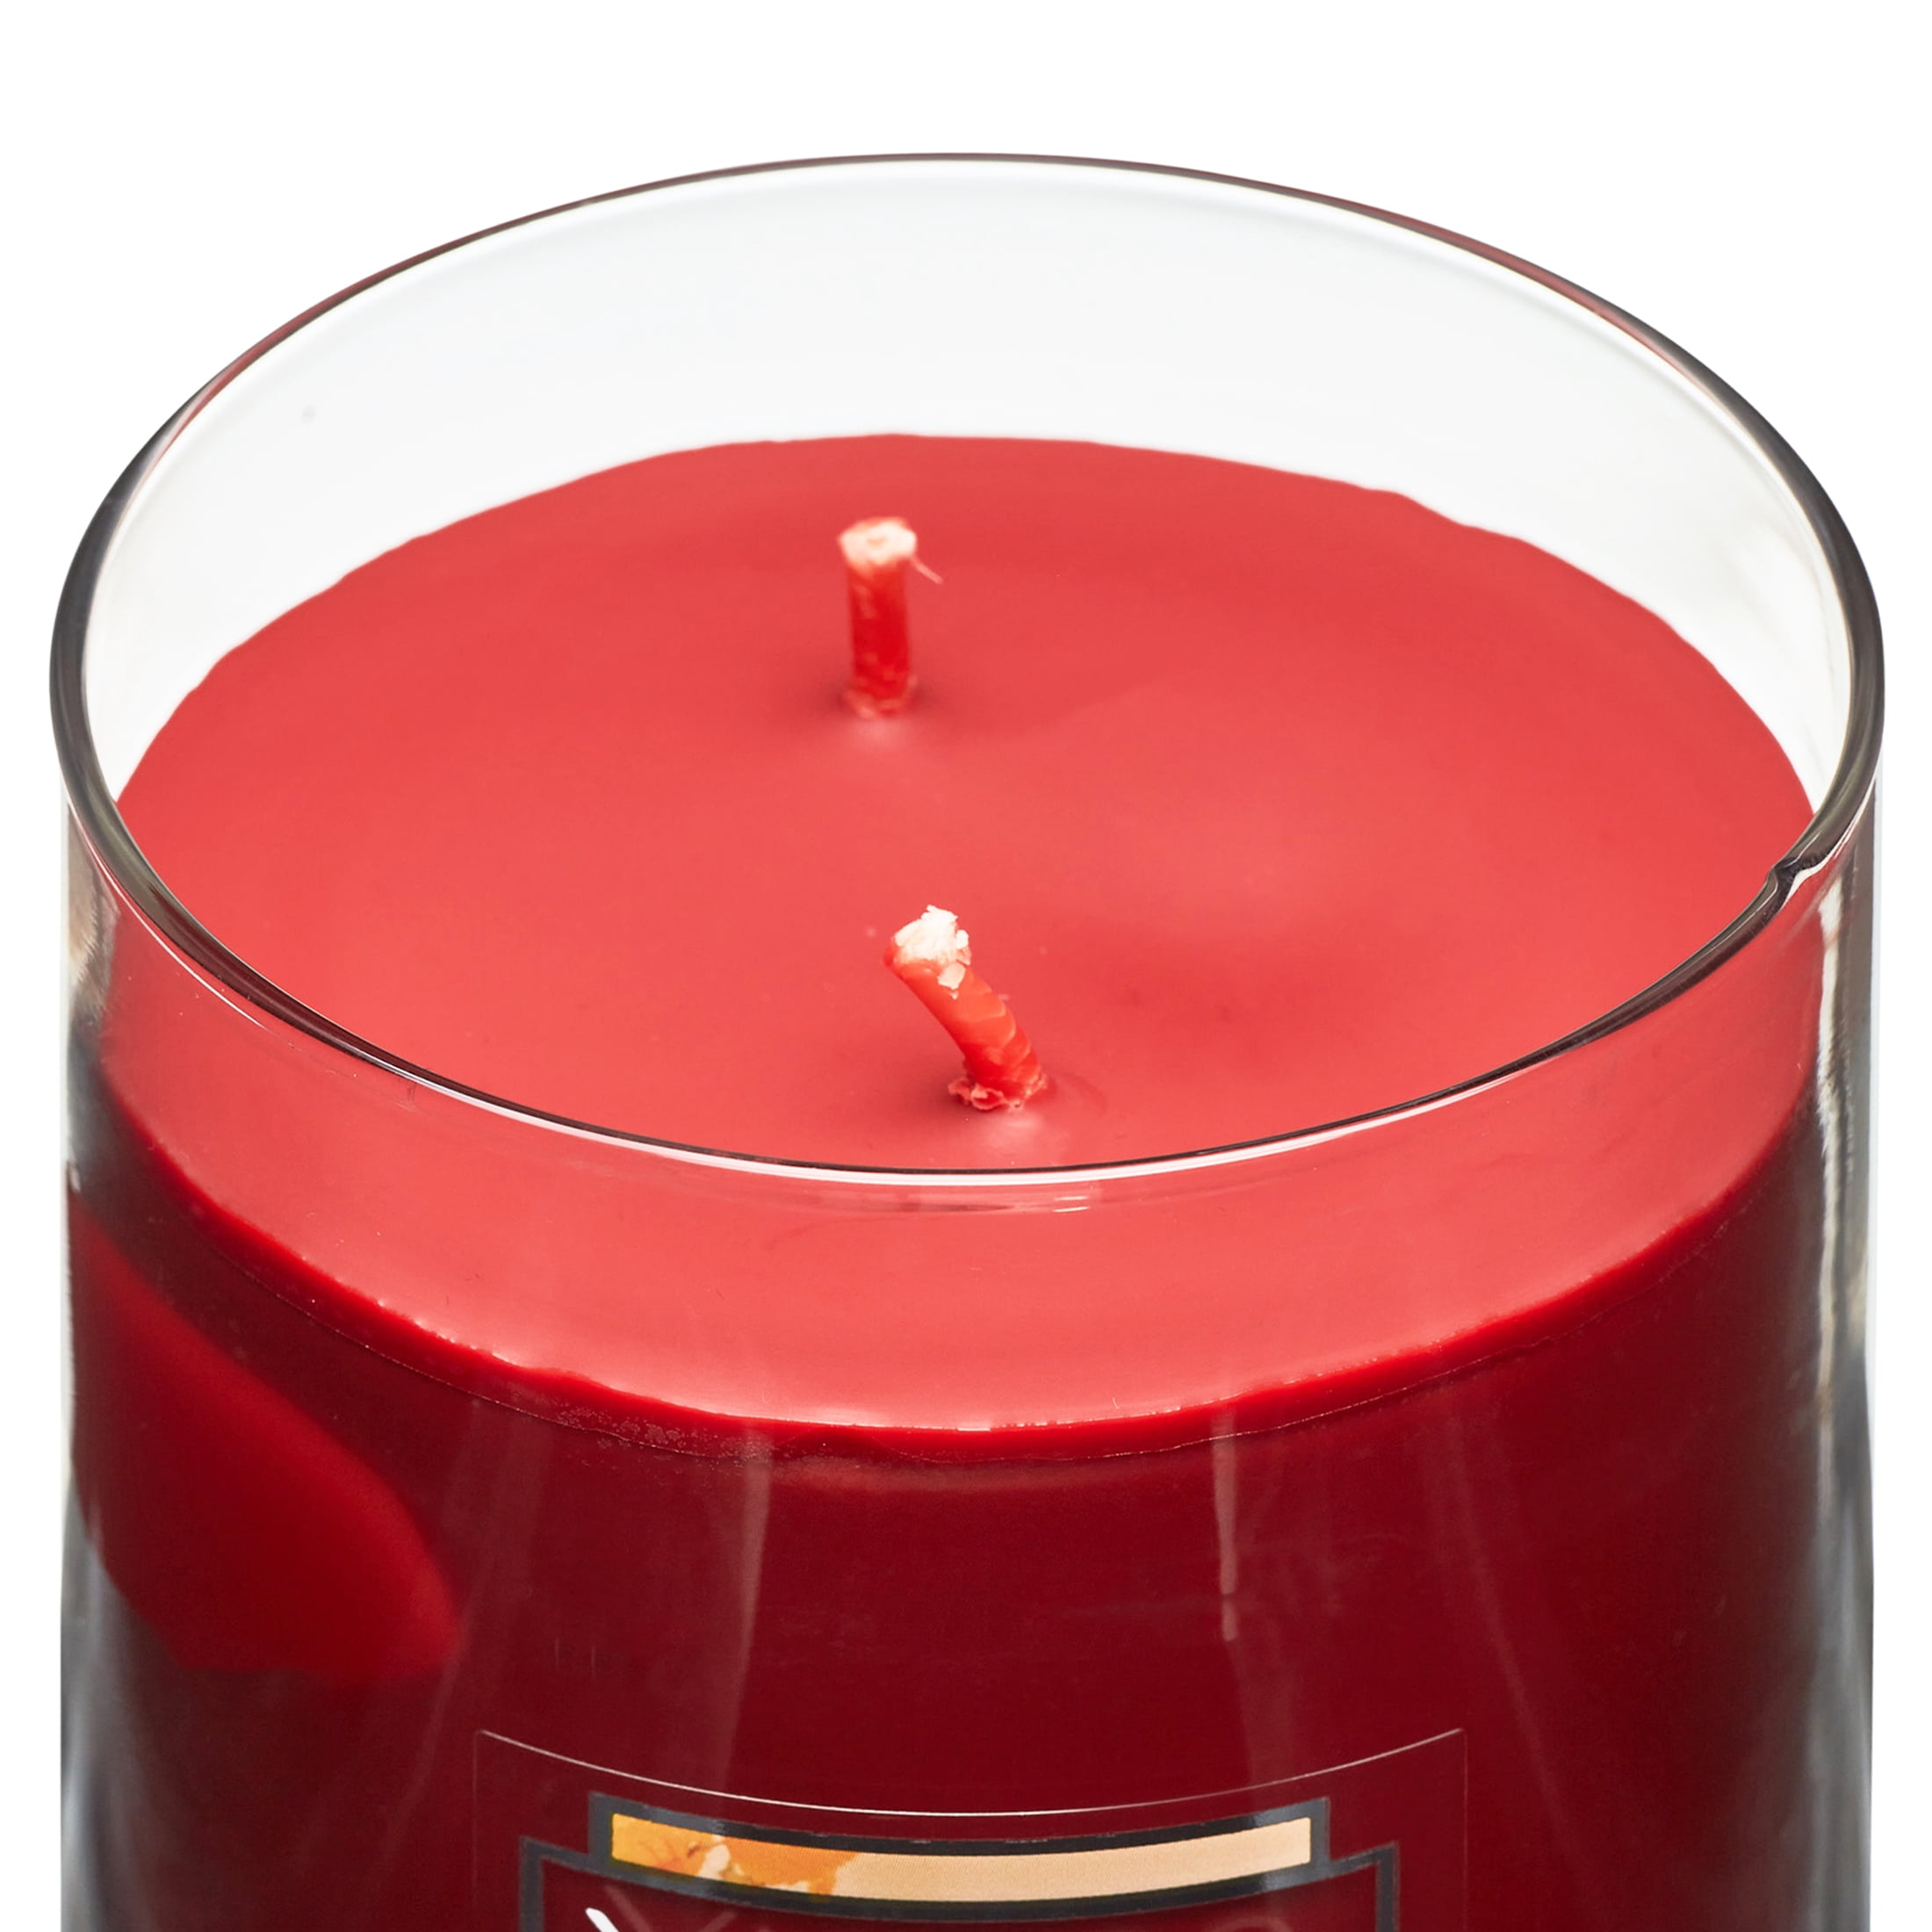 Harmony Candles, Yankee Candles, Candle Warmer and 1 Pillar Candle -  Sherwood Auctions